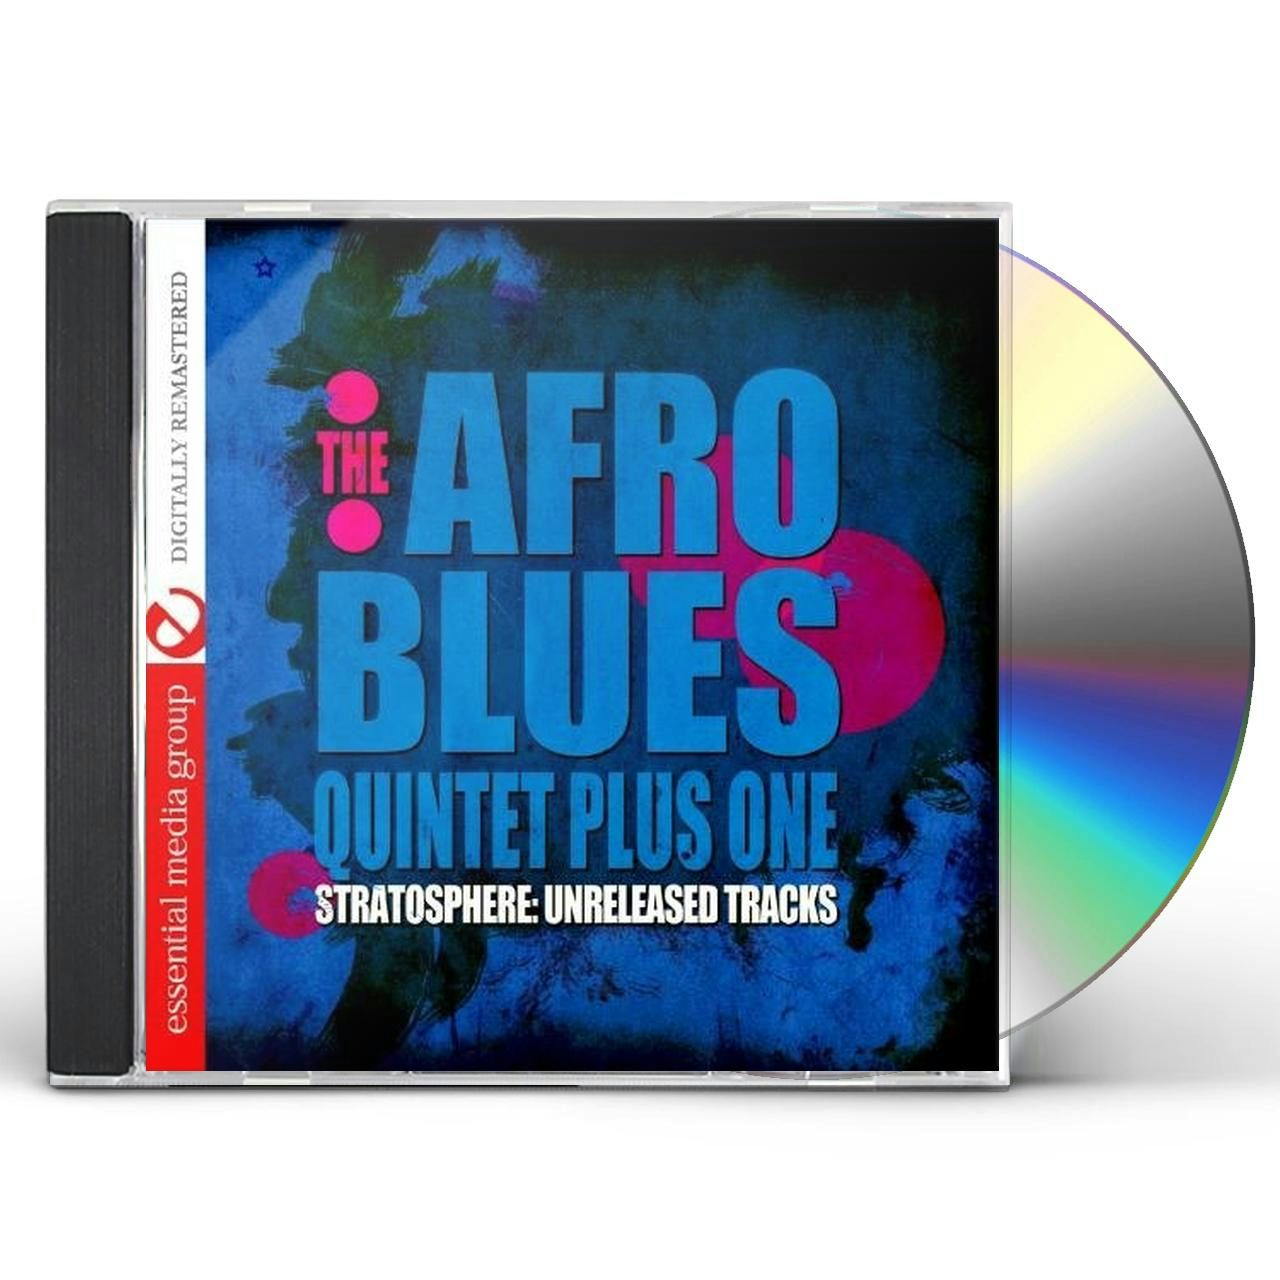 Afro Blues Quintet Plus One STRATOSPHERE: UNRELEASED TRACKS CD